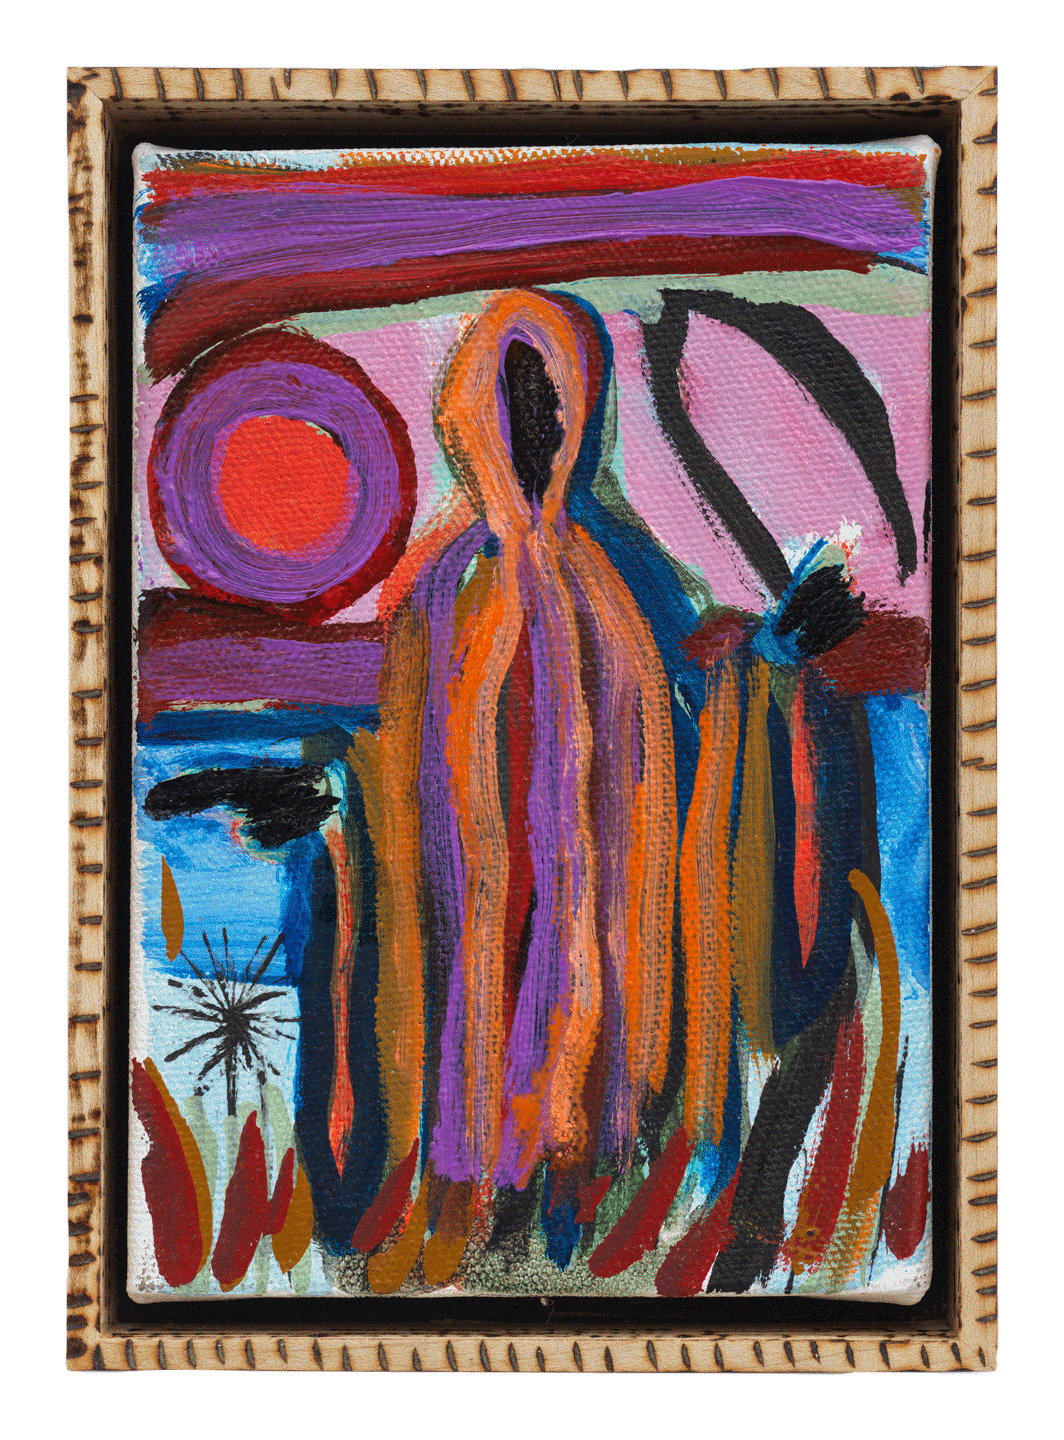 An oil painting on canvas in artist's frame by Josh Smith, titled Small Reaper, dated 2019.